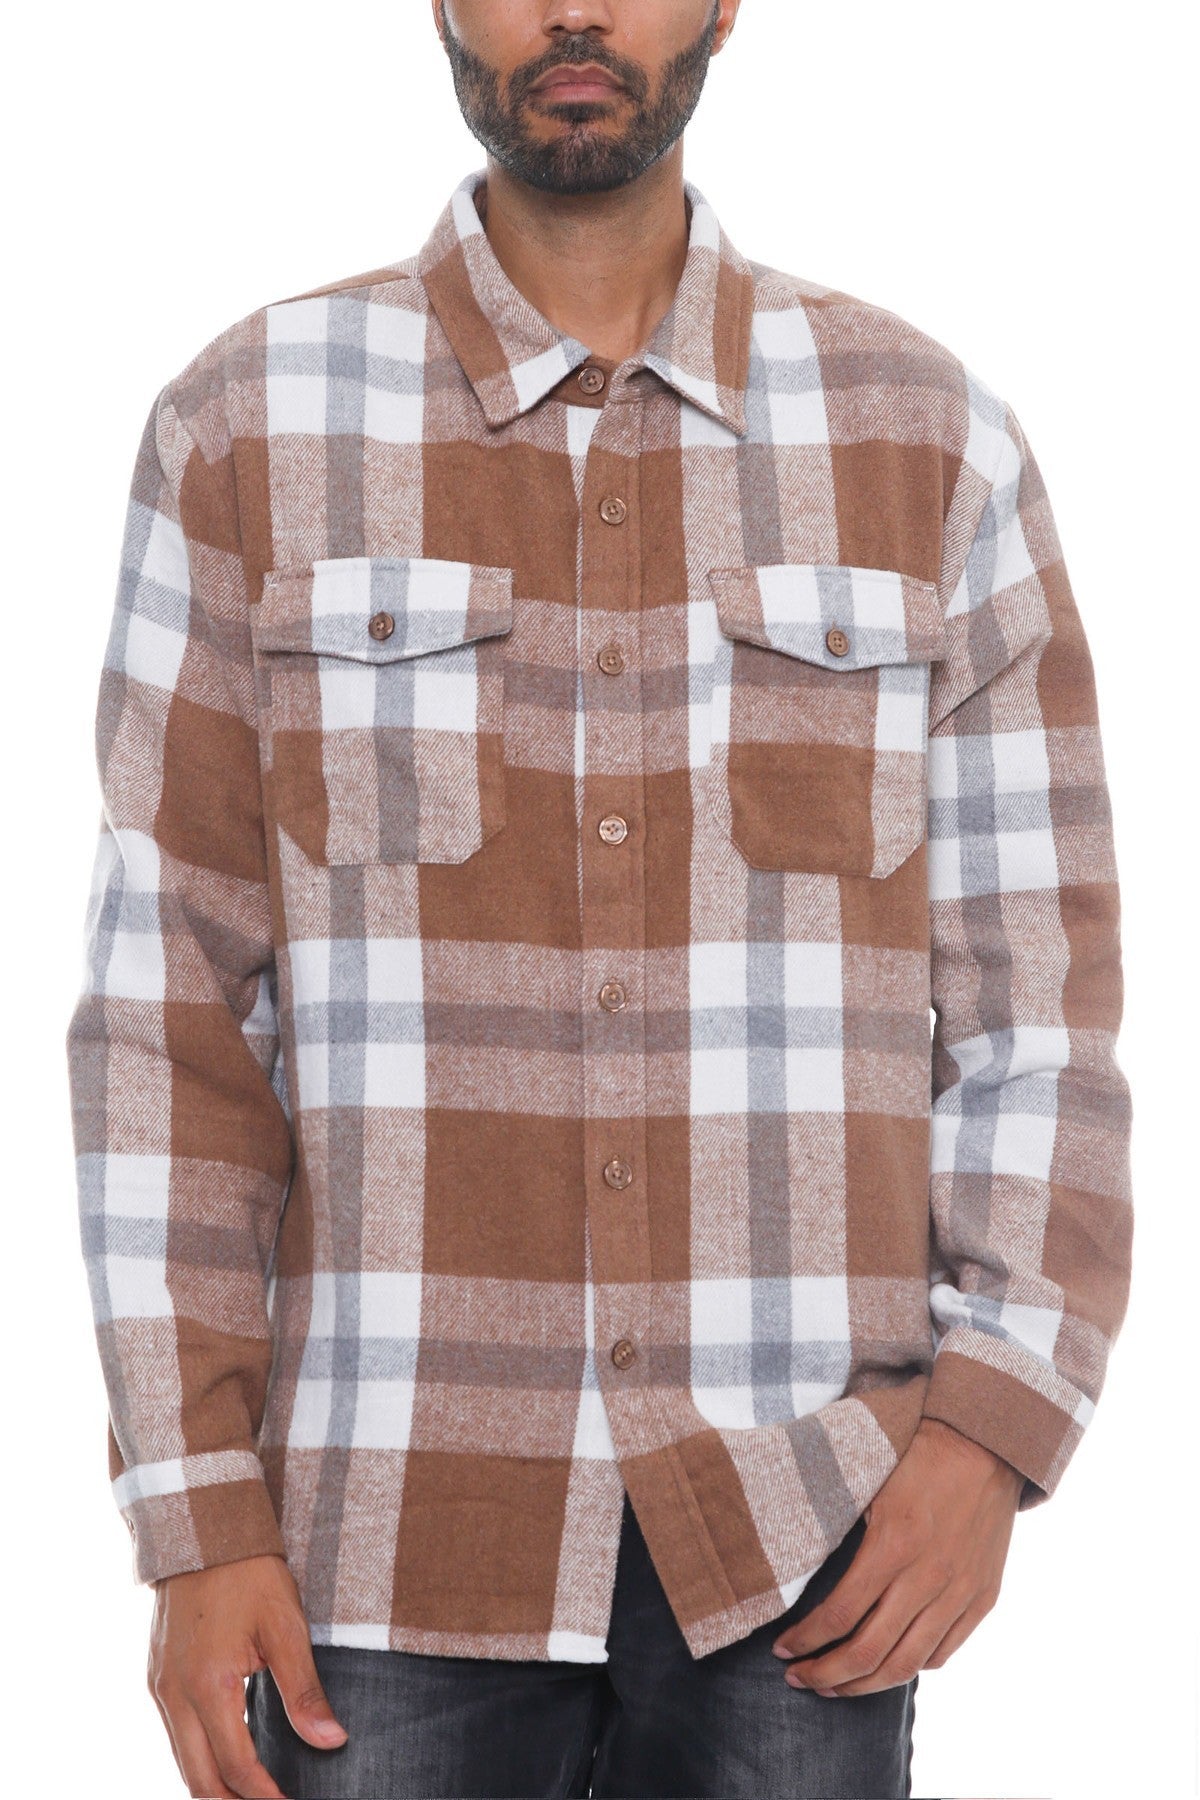 Mocha Grey - Men's Checkered Soft Flannel Shacket - 8 colors - mens button-up shirt at TFC&H Co.